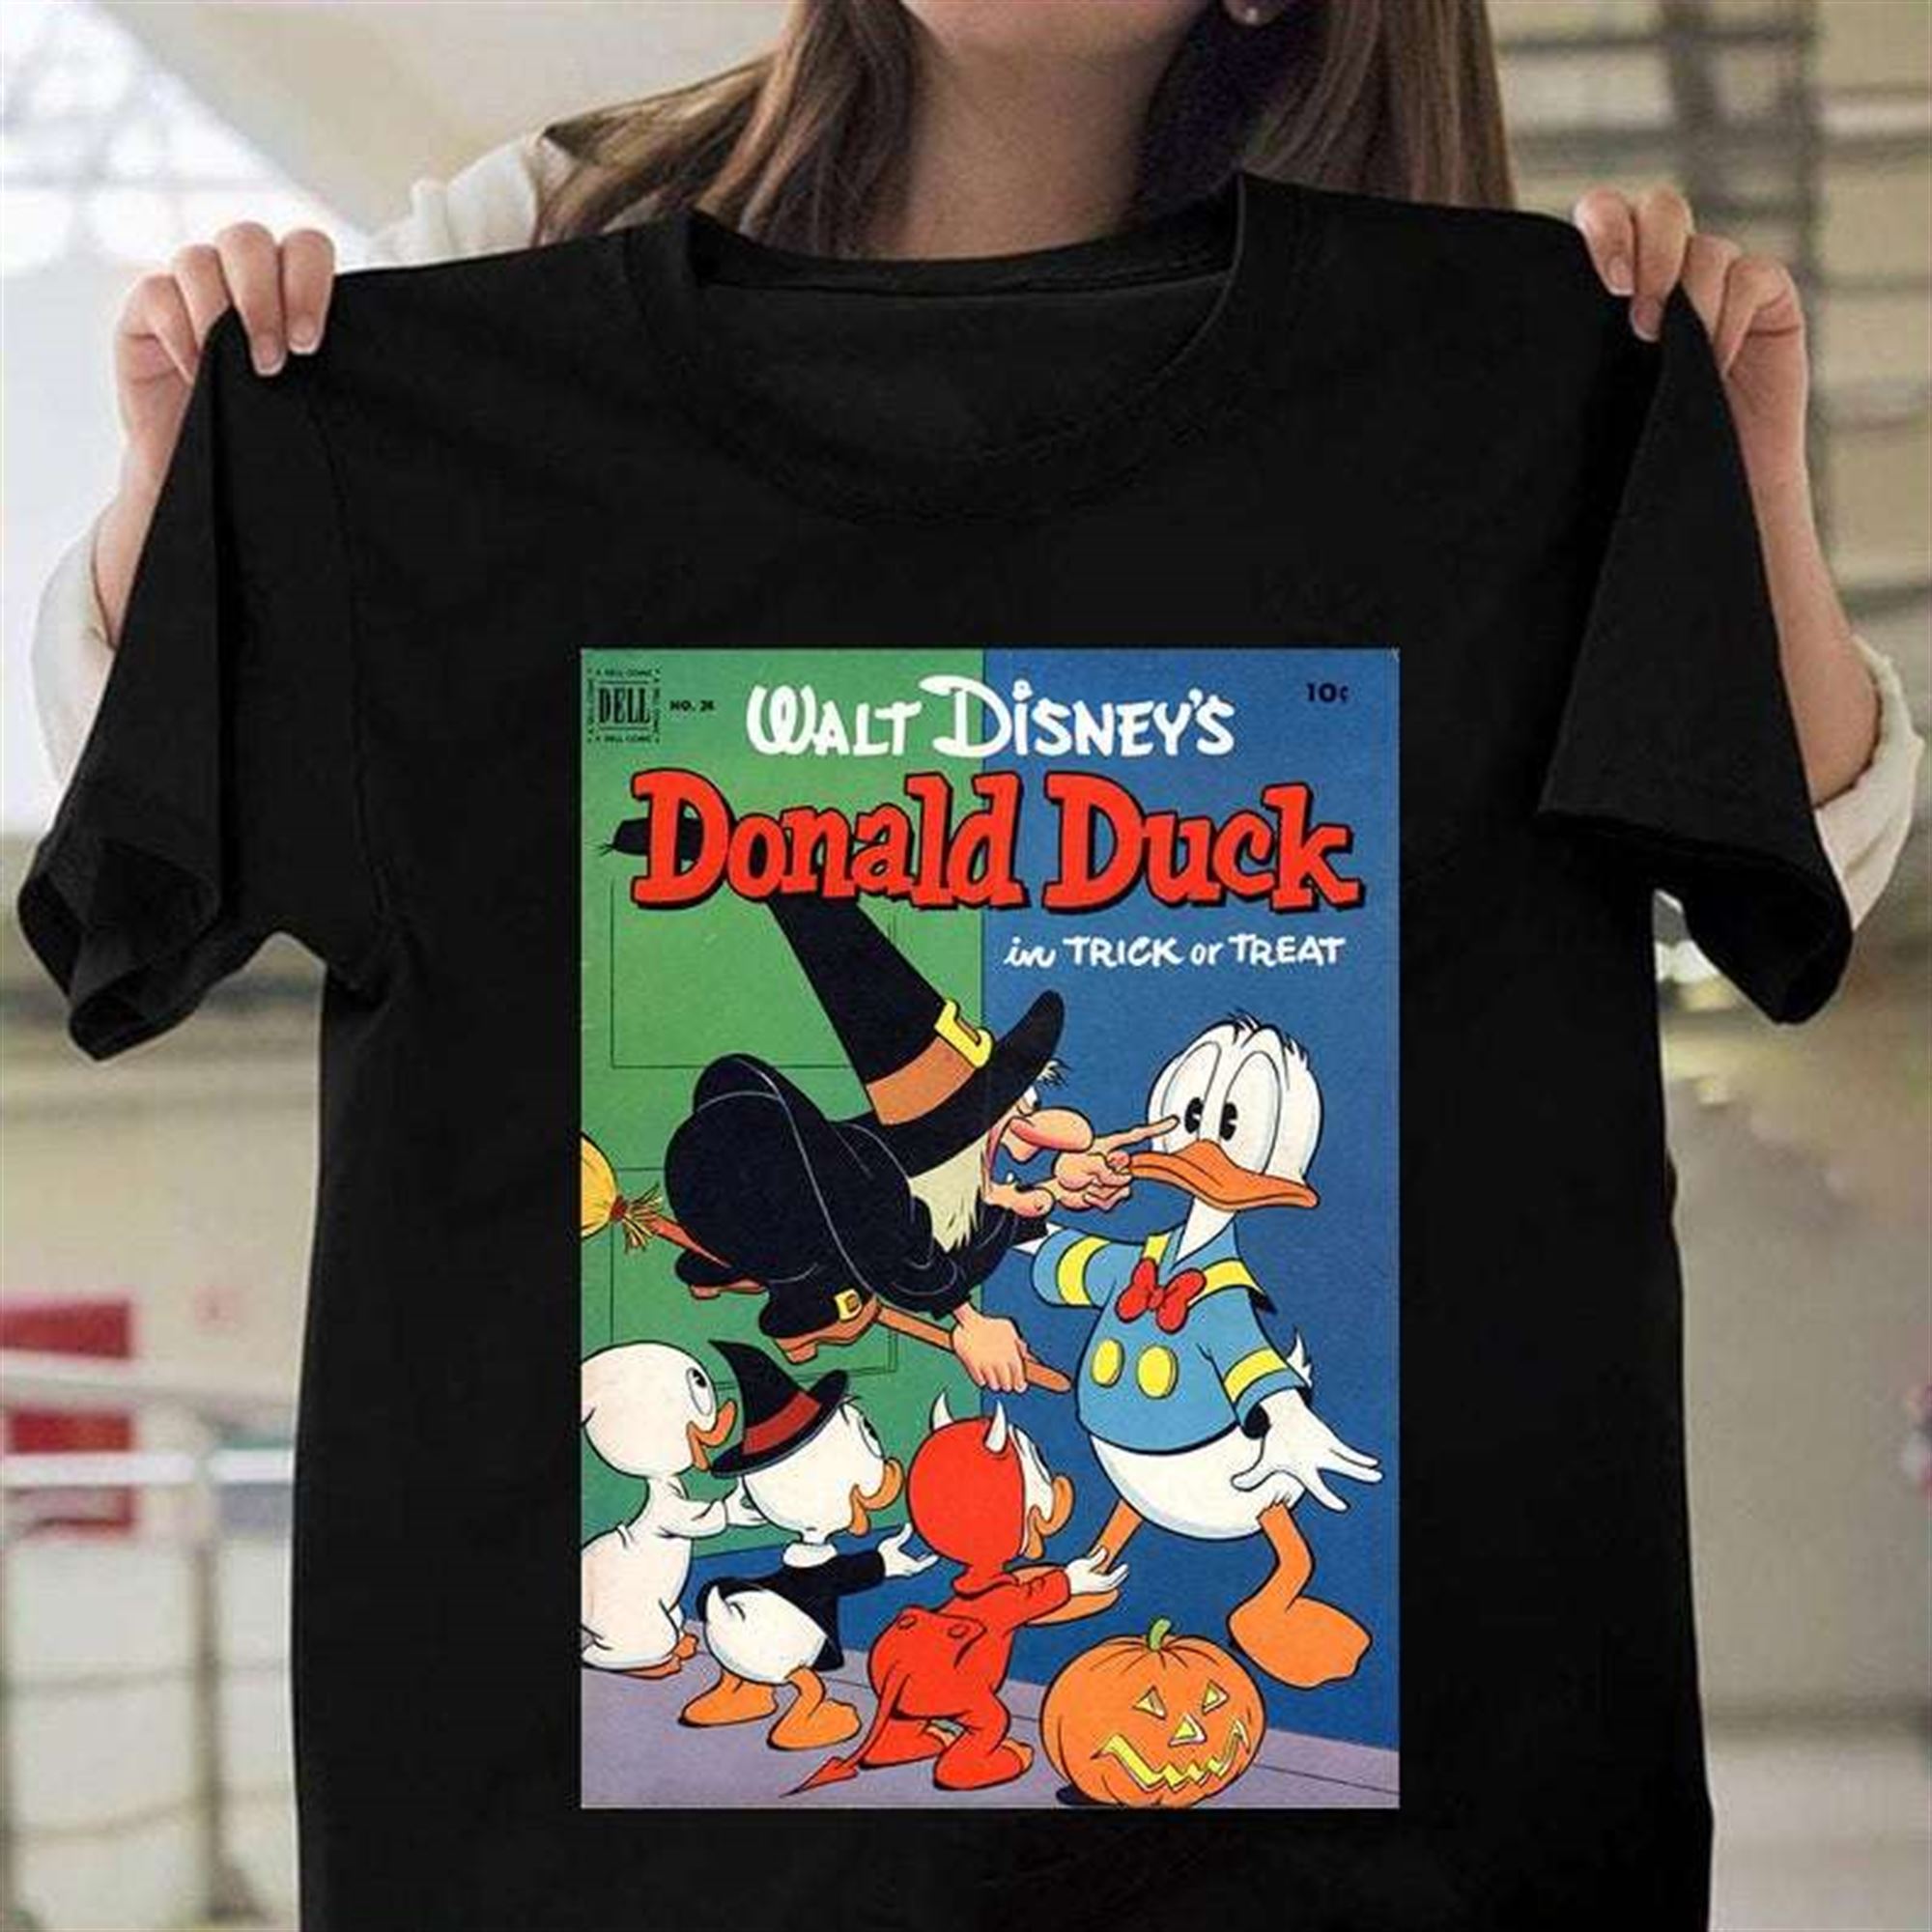 Disney Classic Donald Duck T Shirt Full Size Up To 5xl